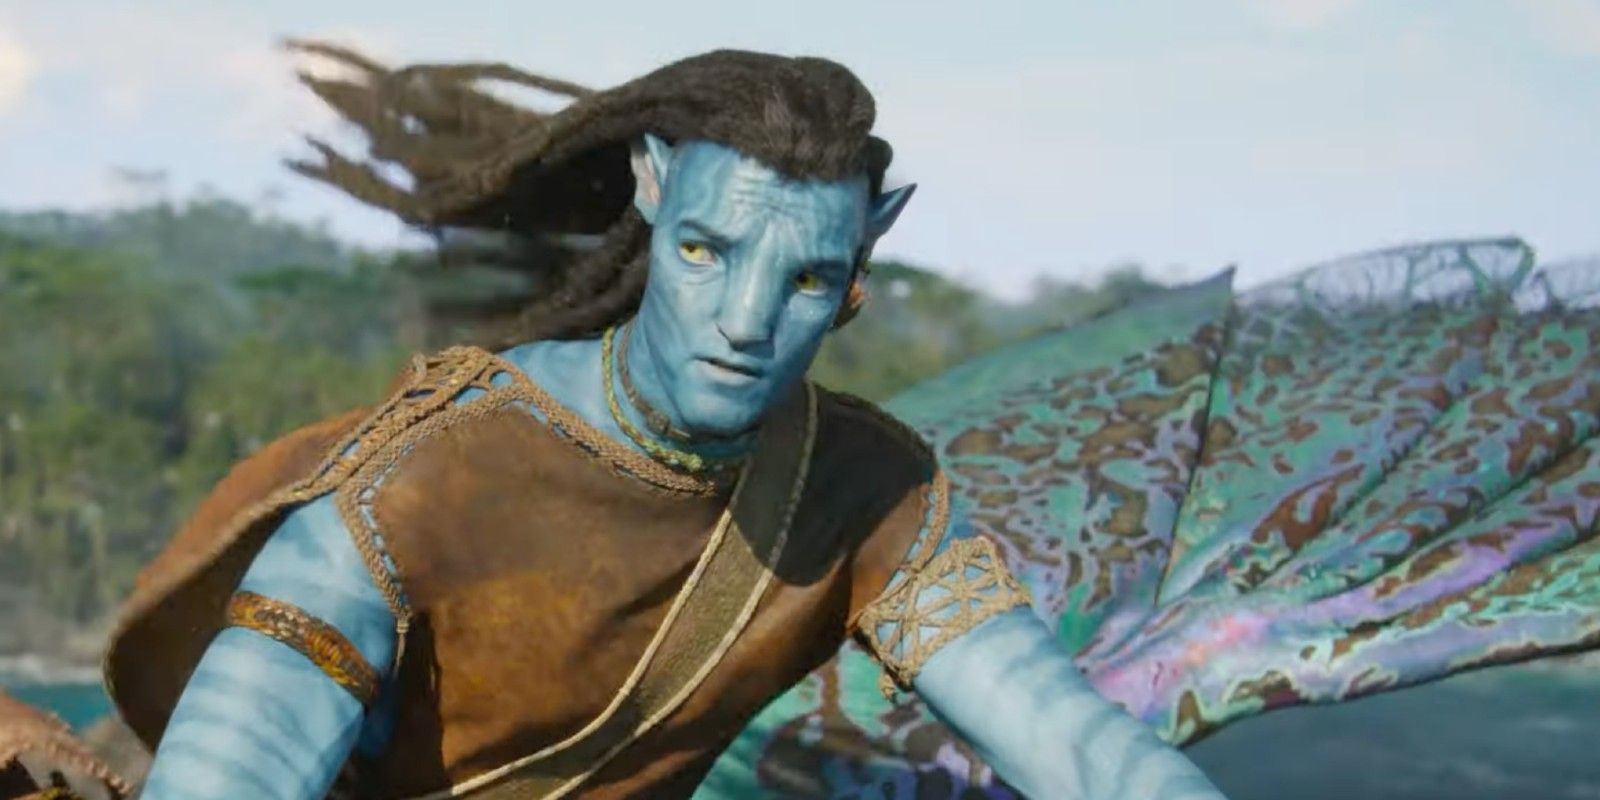 More Avatar Movies Beyond Avatar 5 Are Possible, Hints Producer